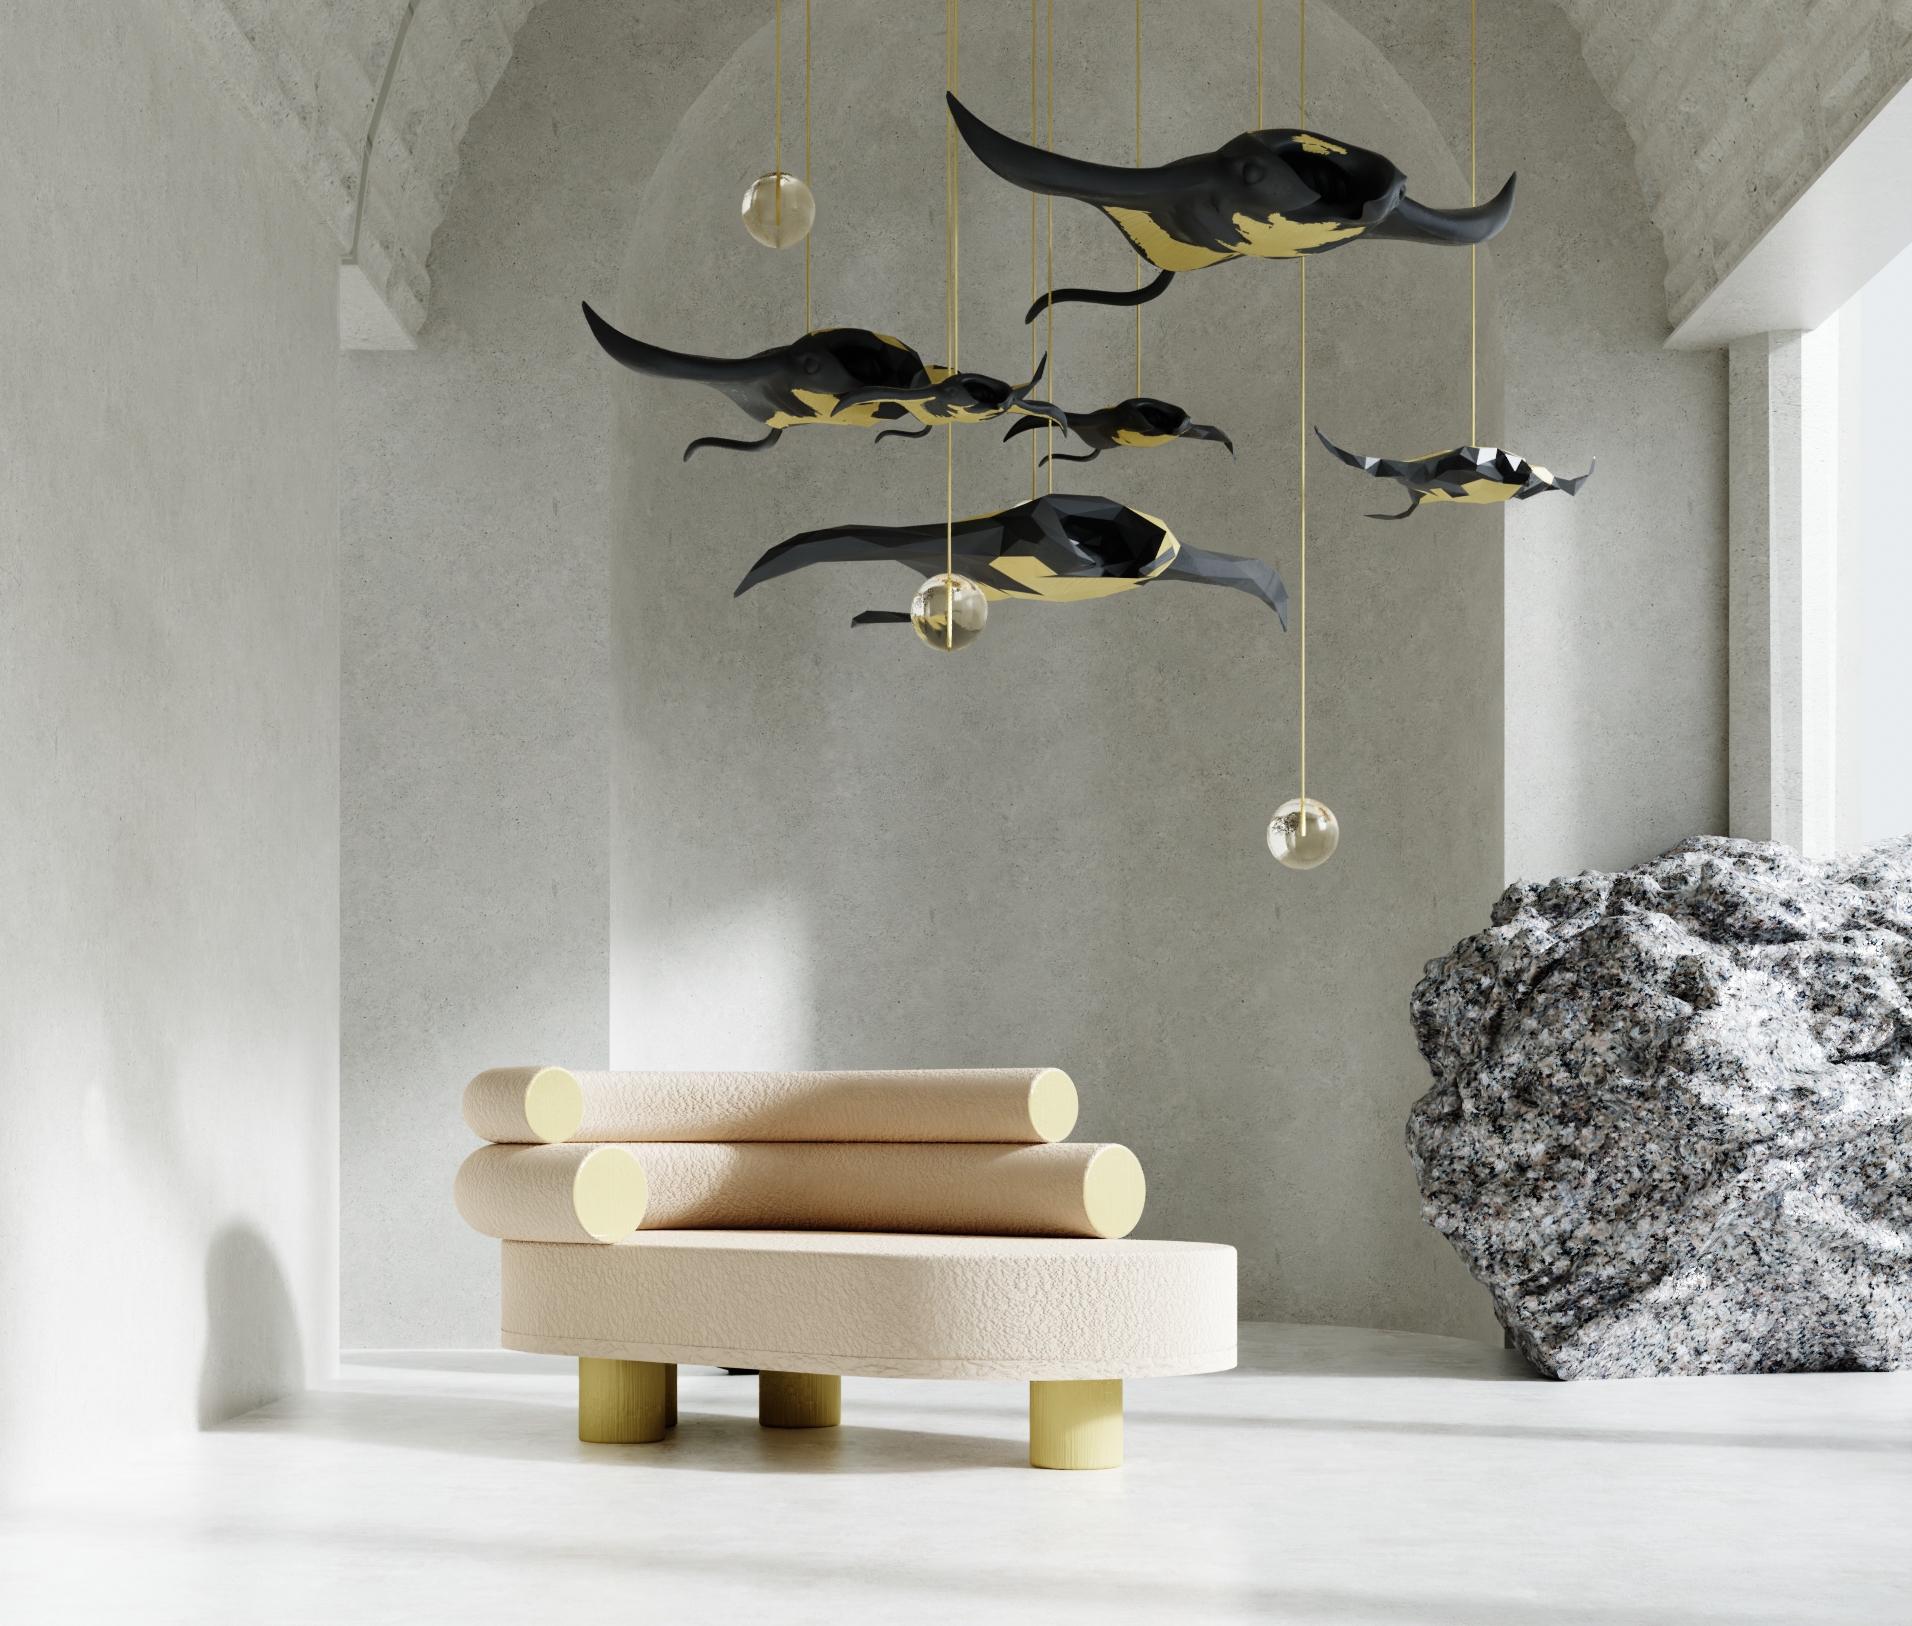 Small Mantas Ray Chandelier by Kasadamo.
Project with pant
Edition of 10
Dimensions: 120 cm³
Materials: 3D print development, bio-plasty, bio resin, linen fiber, metal finishes when necessary.
Available in other size: 280 cm³

All our lamps can be